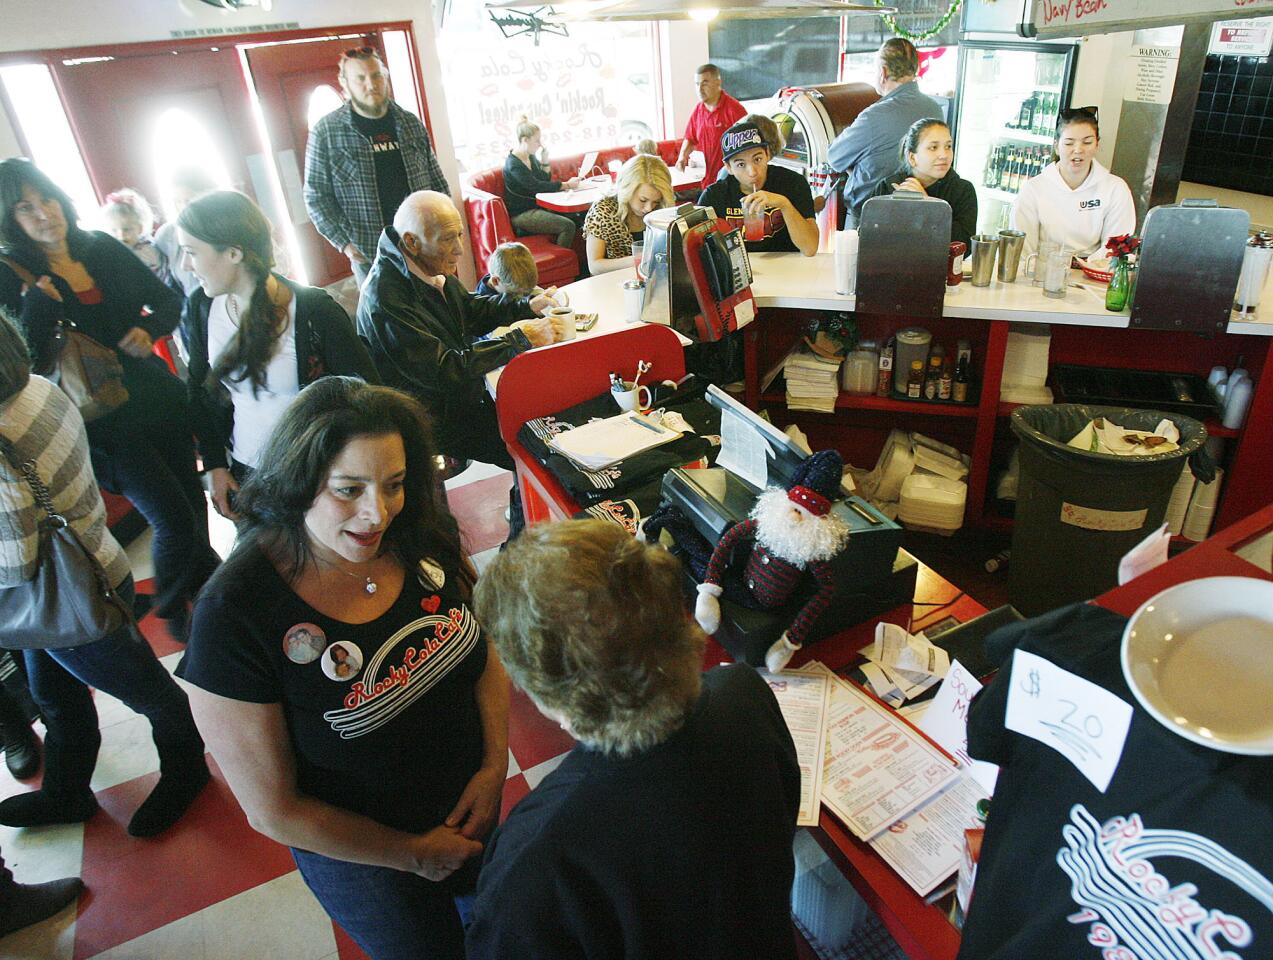 Lucy DiMino, at bottom, talks with a well-wisher at a very busy Rocky Cola Cafe in Montrose on Thursday, December 27, 2012. The diner, which has been open nearly 25 years, will close Sunday due to a downturn in the economy and an increasing number of local restaurants.